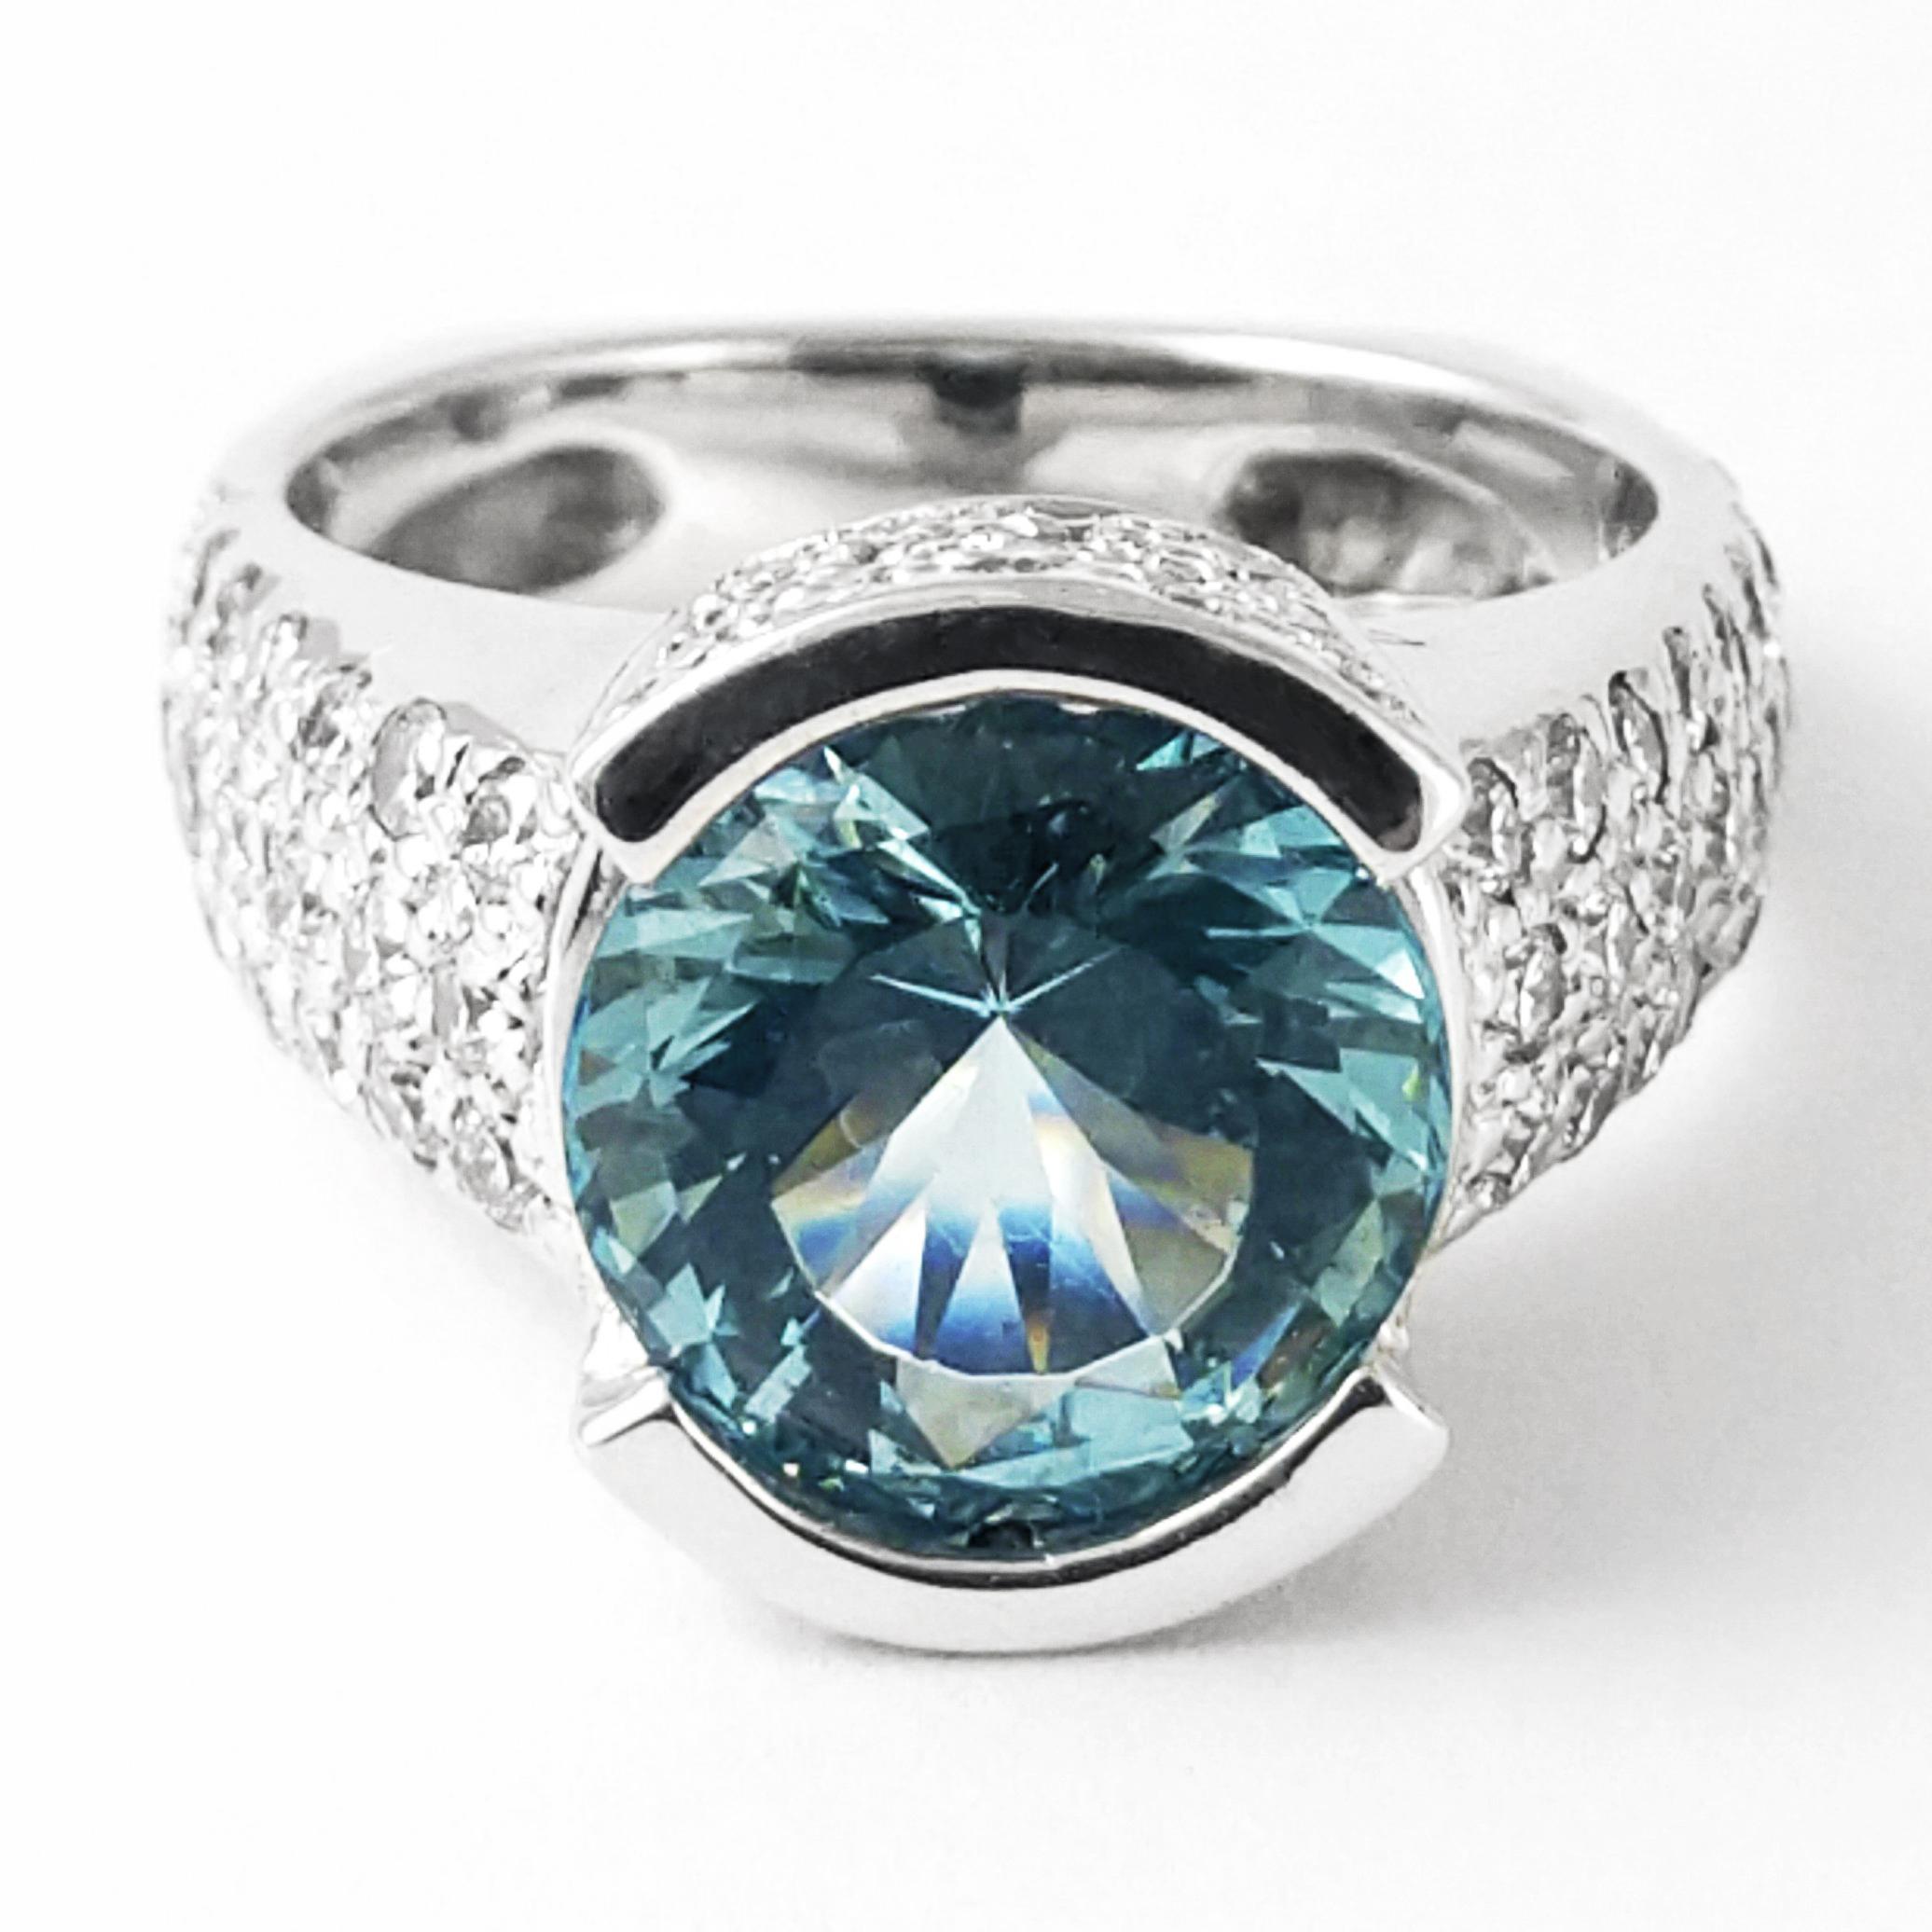 This glamorous and timeless 18K white gold women's ring is featuring a 2.75ct round aquamarine that is exhibiting deep turquoise blue tiffany hues. The gemstone is in a bezel-set style band for easy maintenance and protection. This original Cornelis